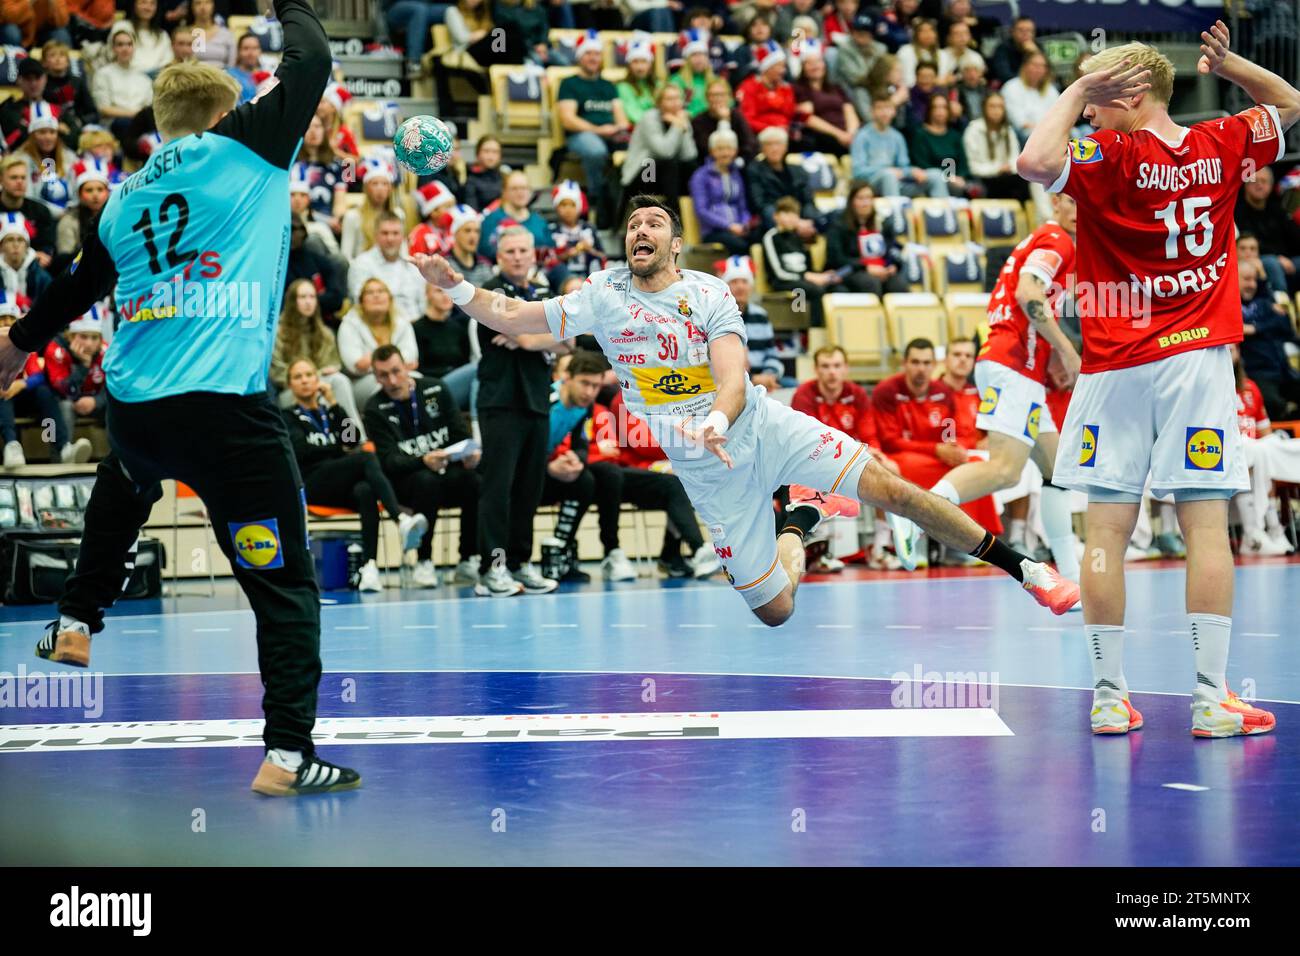 Sotra 20231104.Spain's Gedeón Guardiola Villaplana during the handball match in the Golden League Gjensidige Cup between Denmark and Spain in the Sotra Arena. Photo: Stian Lysberg Solum / NTB Stock Photo